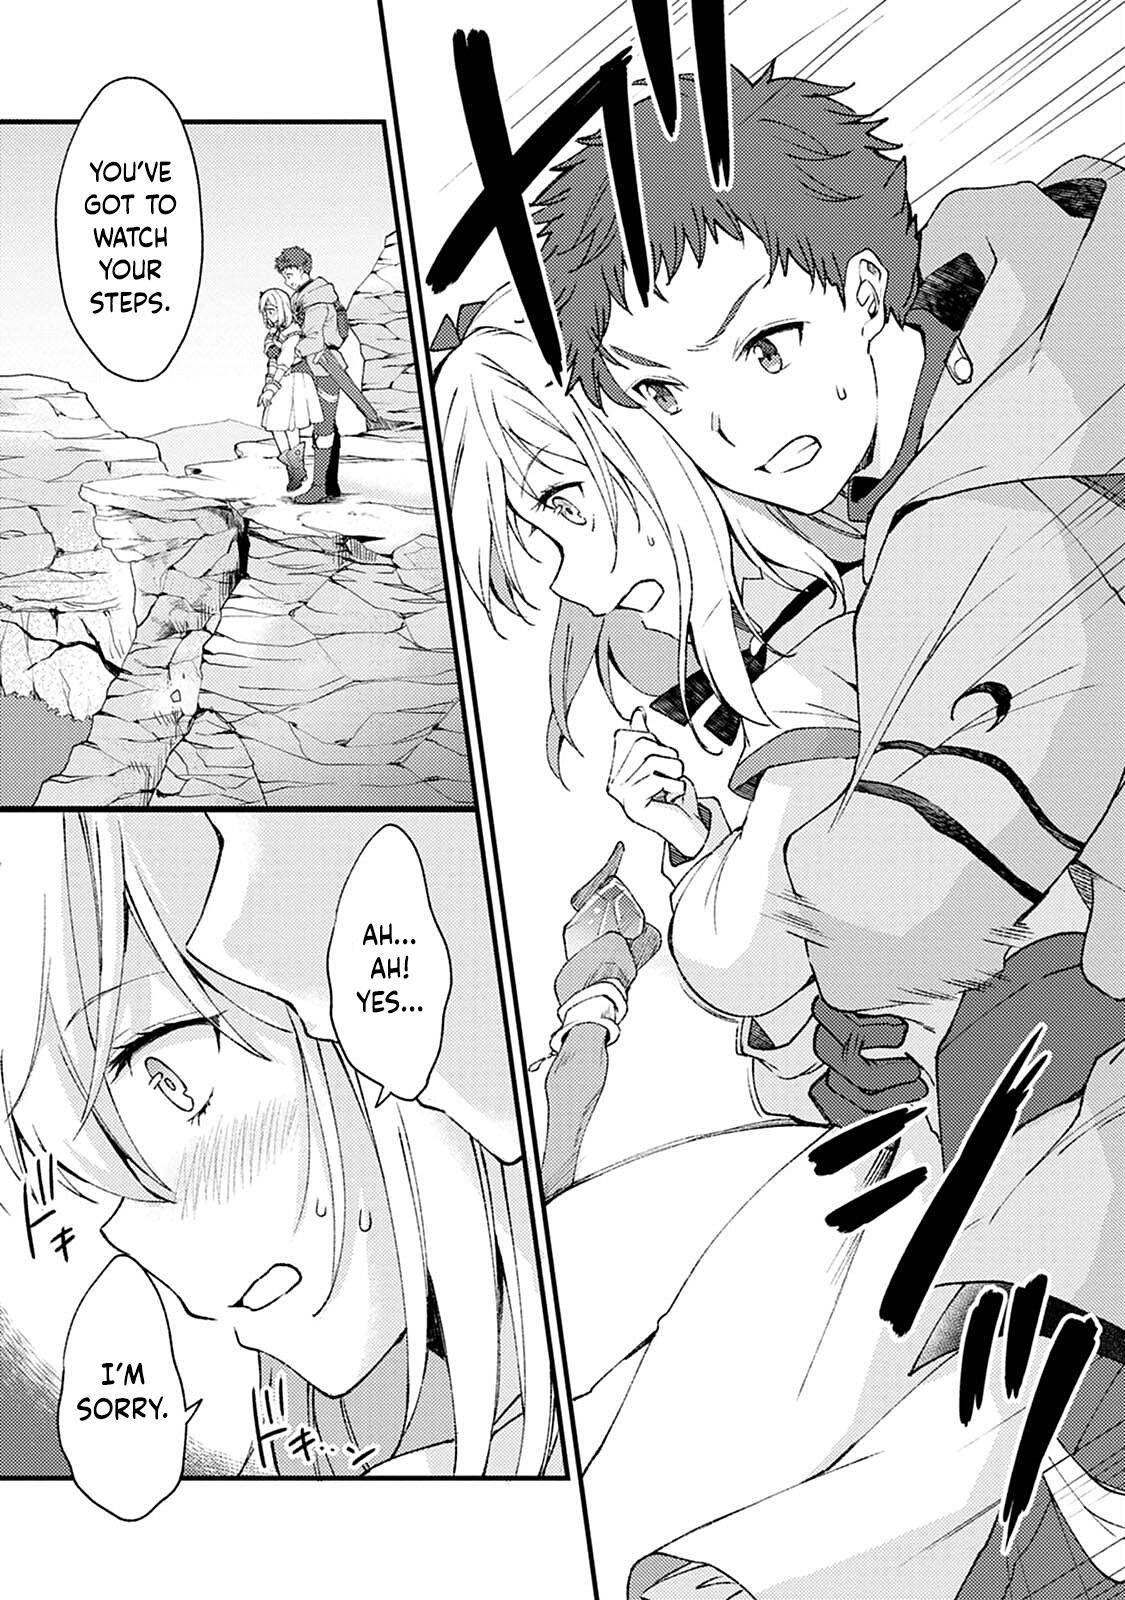 A Sword Master Childhood Friend Power Harassed Me Harshly - chapter 9 - #6